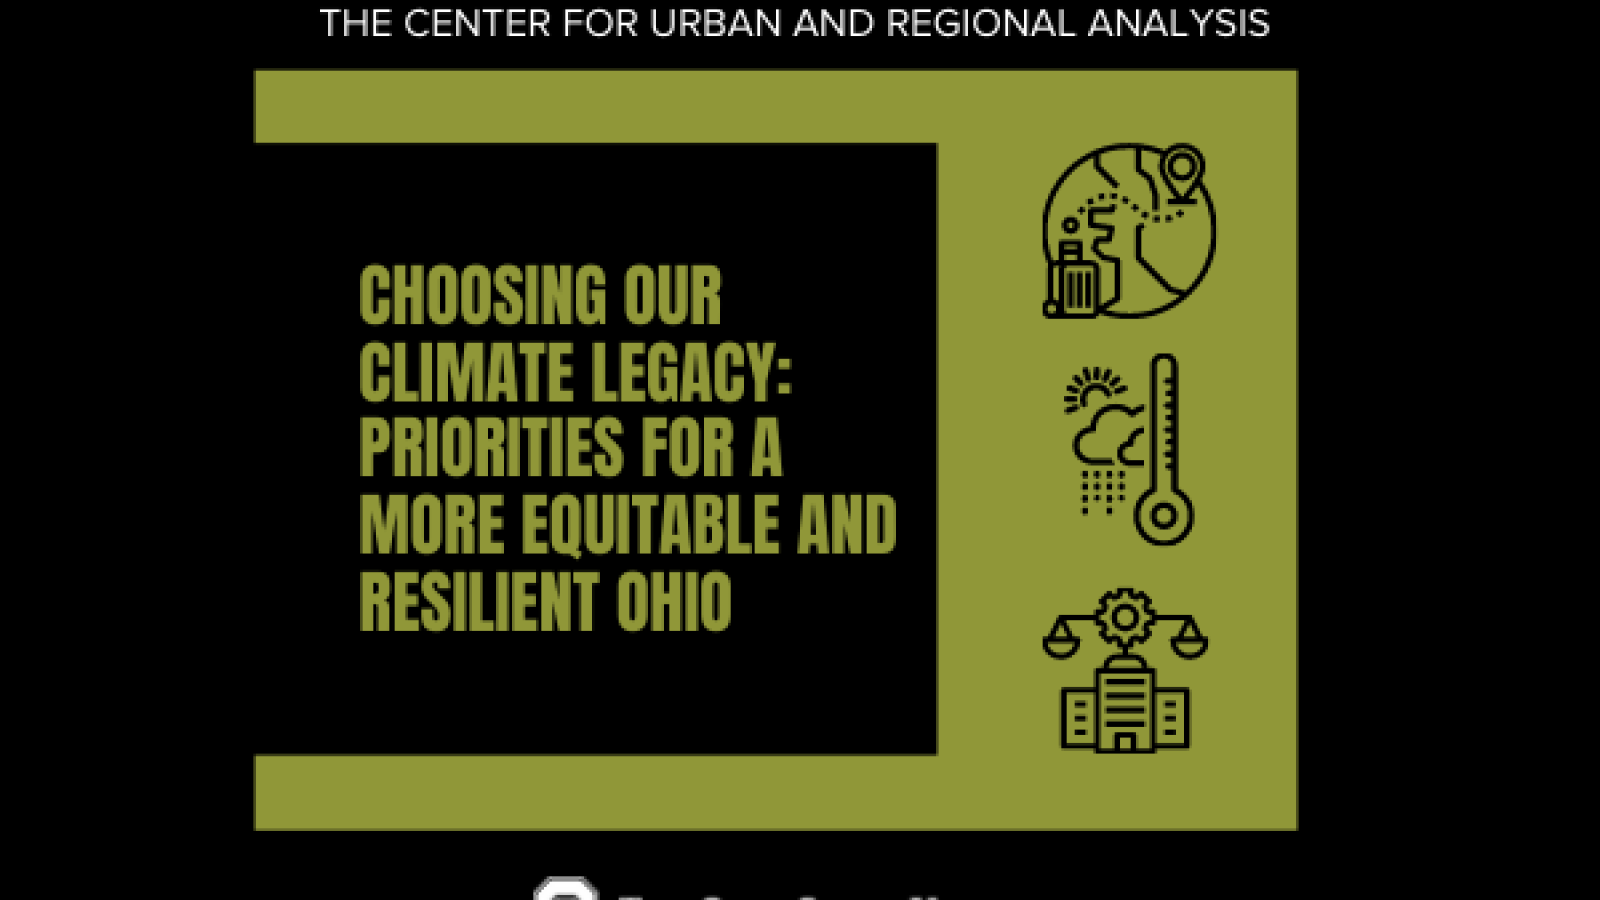 Choosing our climate legacy: priorities for a more equitable and resilient Ohio 